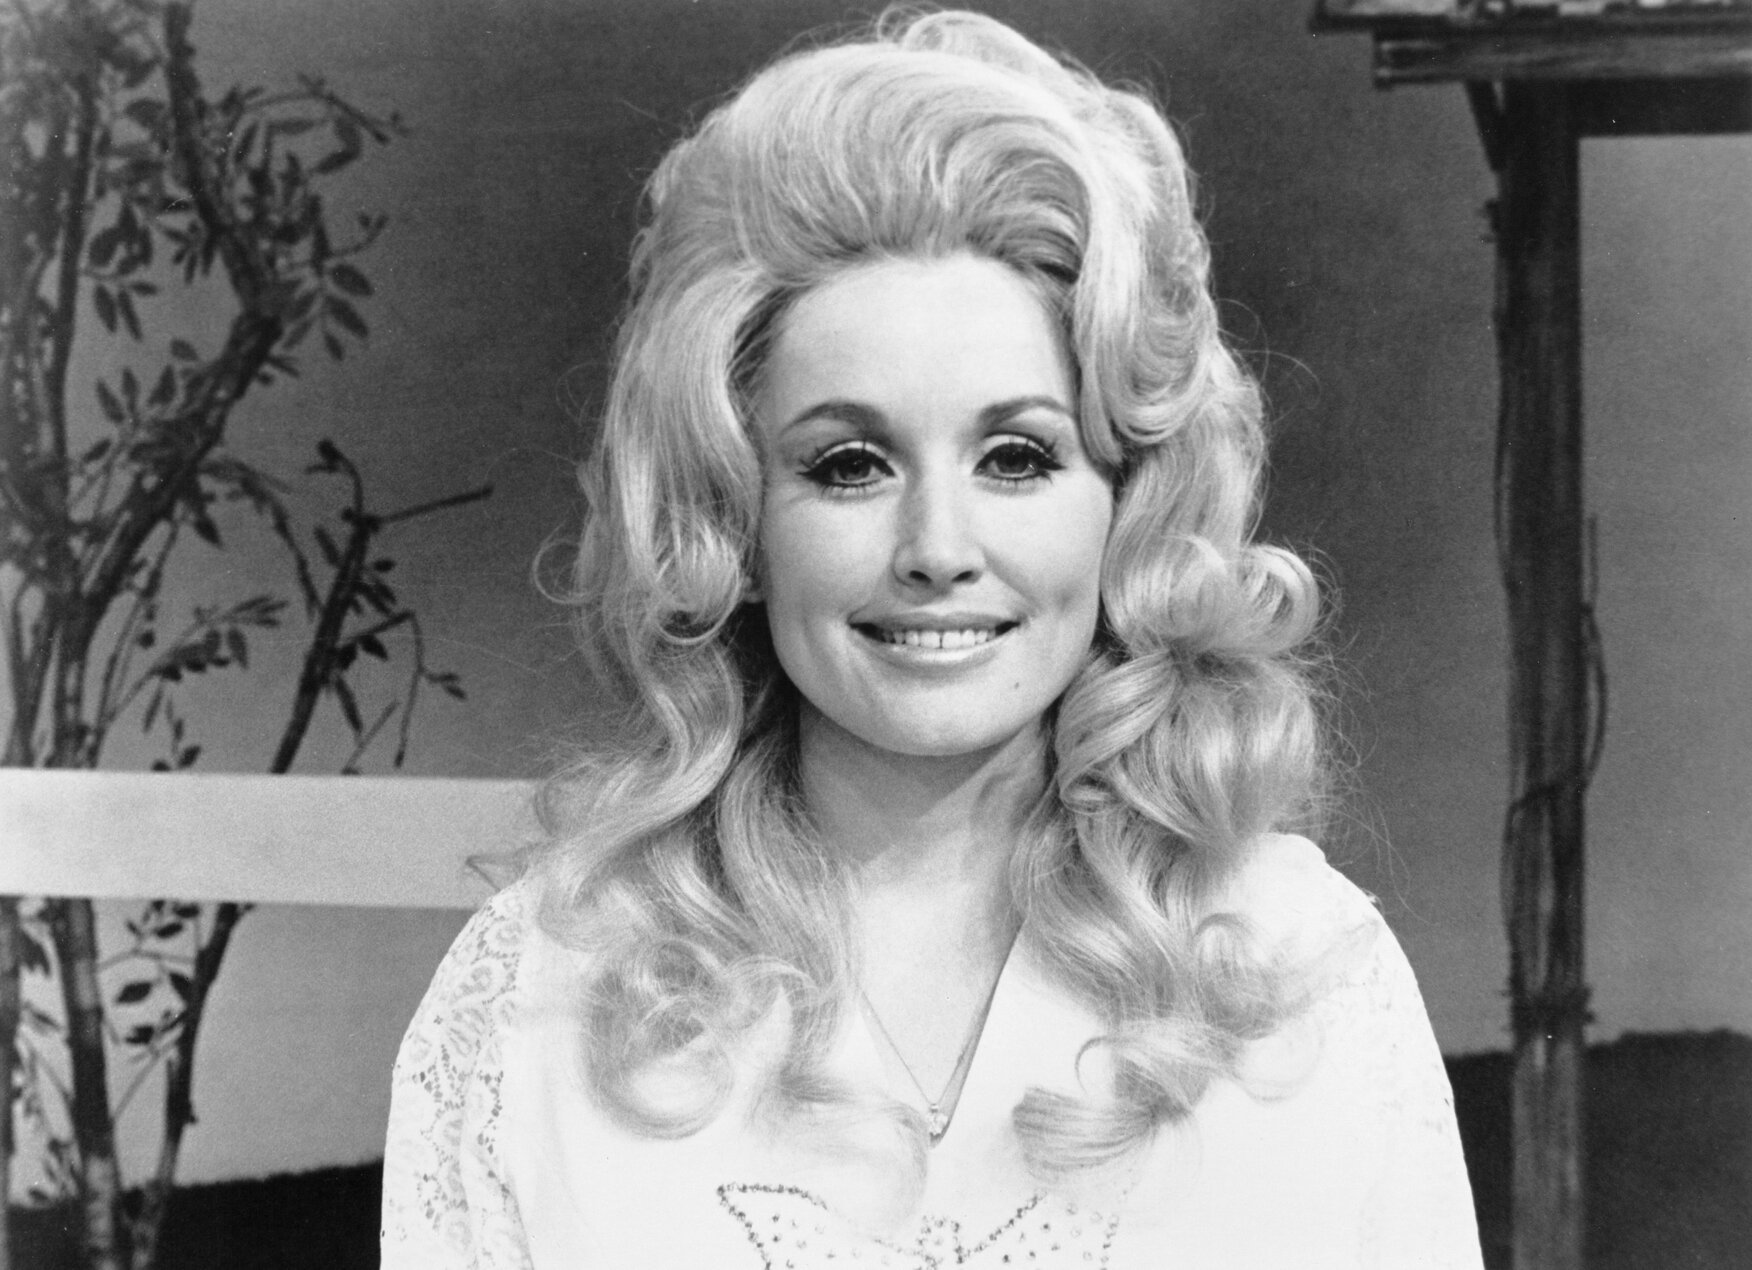 A black and white portrait of Dolly Parton in 1972.